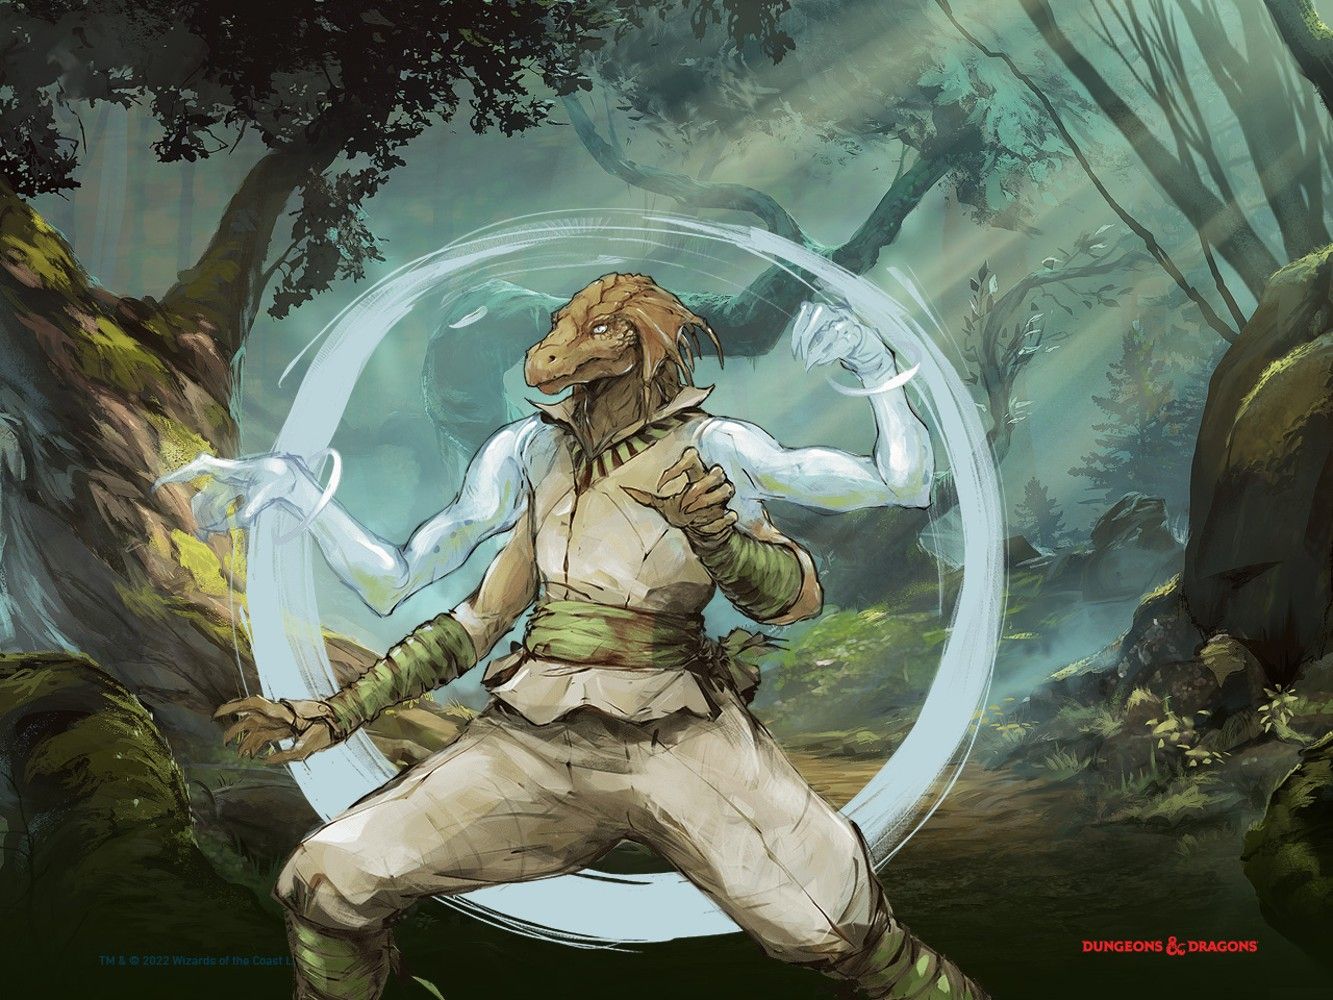 Monk using Astral Self arms with a nature background.